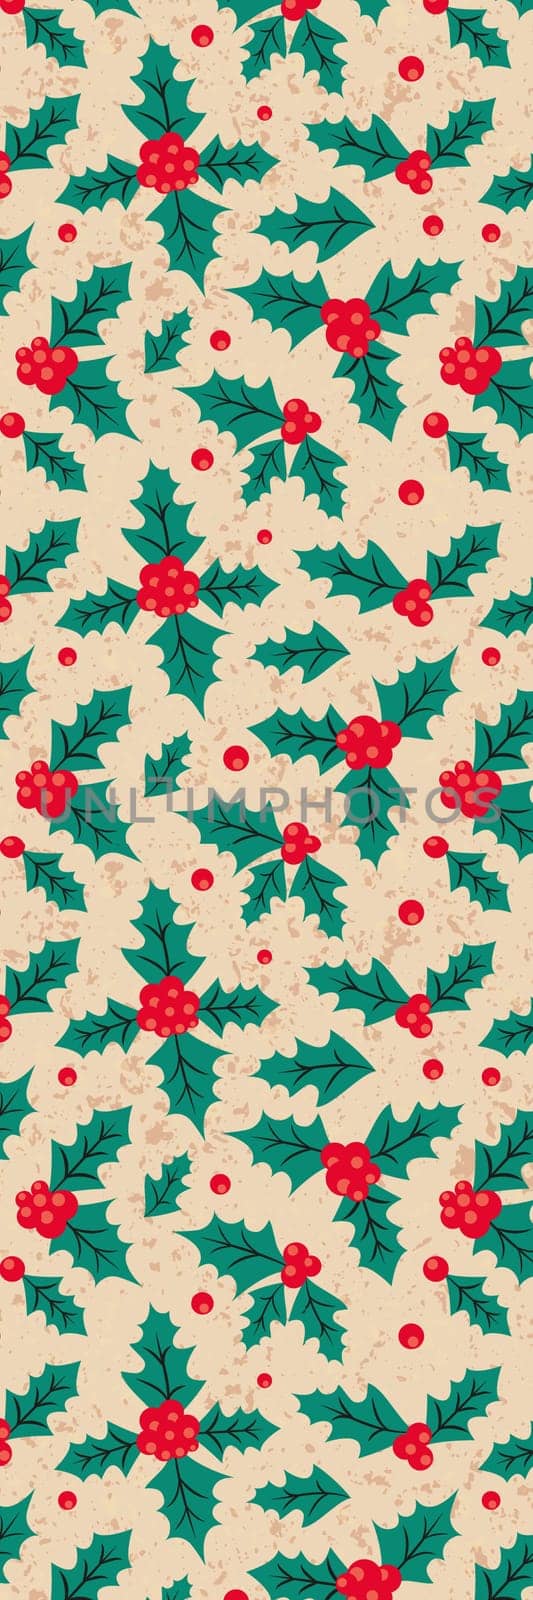 Retro Bookmark with Christmas holly pattern